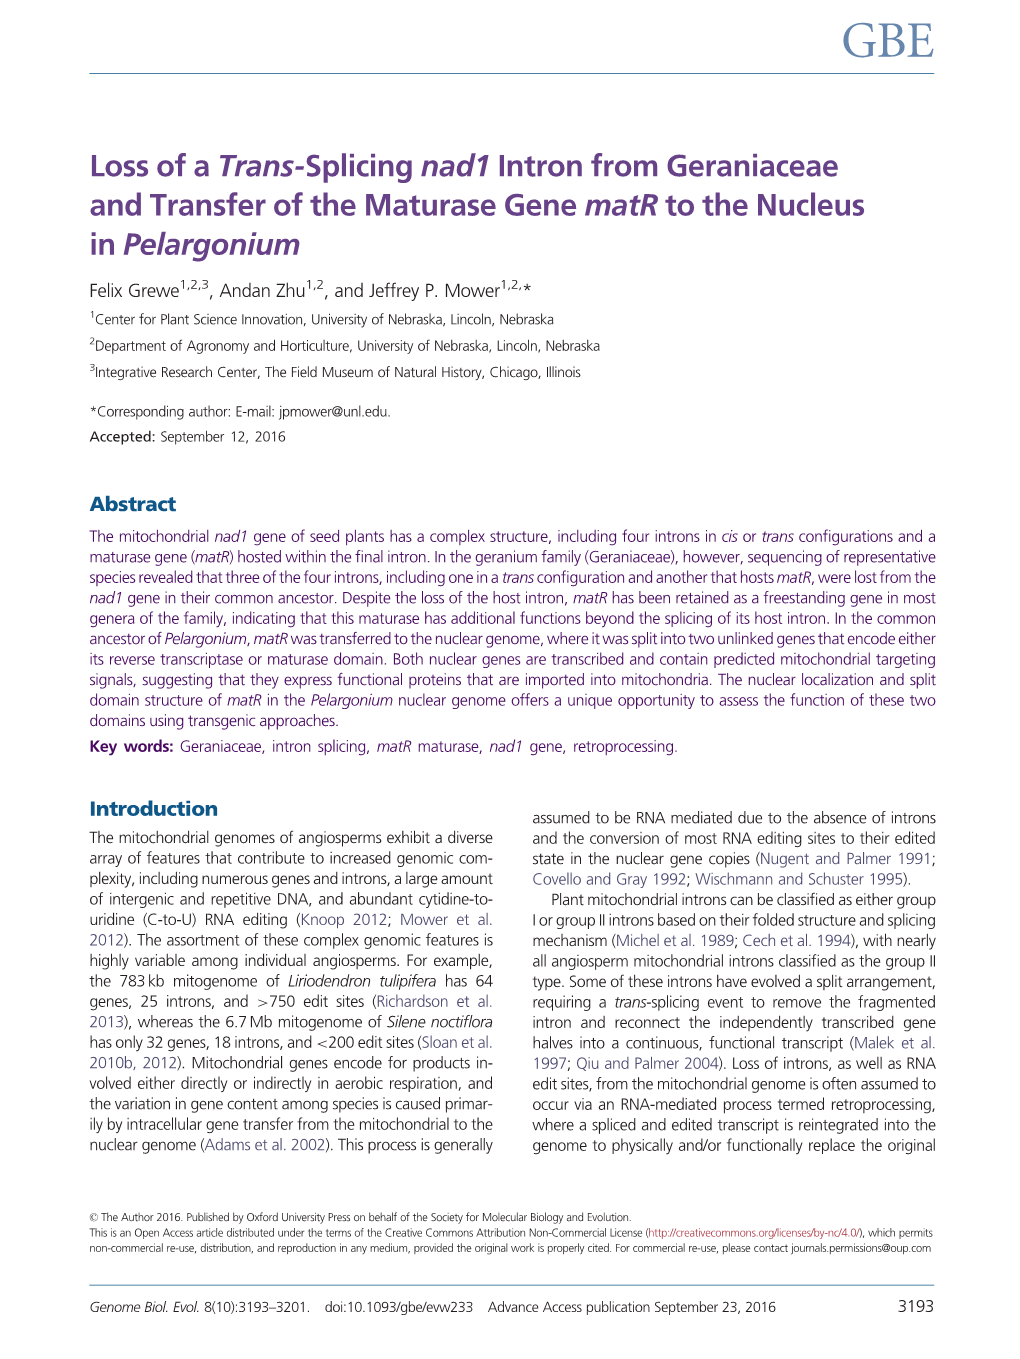 Loss of a Trans-Splicing Nad1 Intron from Geraniaceae and Transfer of the Maturase Gene Matr to the Nucleus in Pelargonium